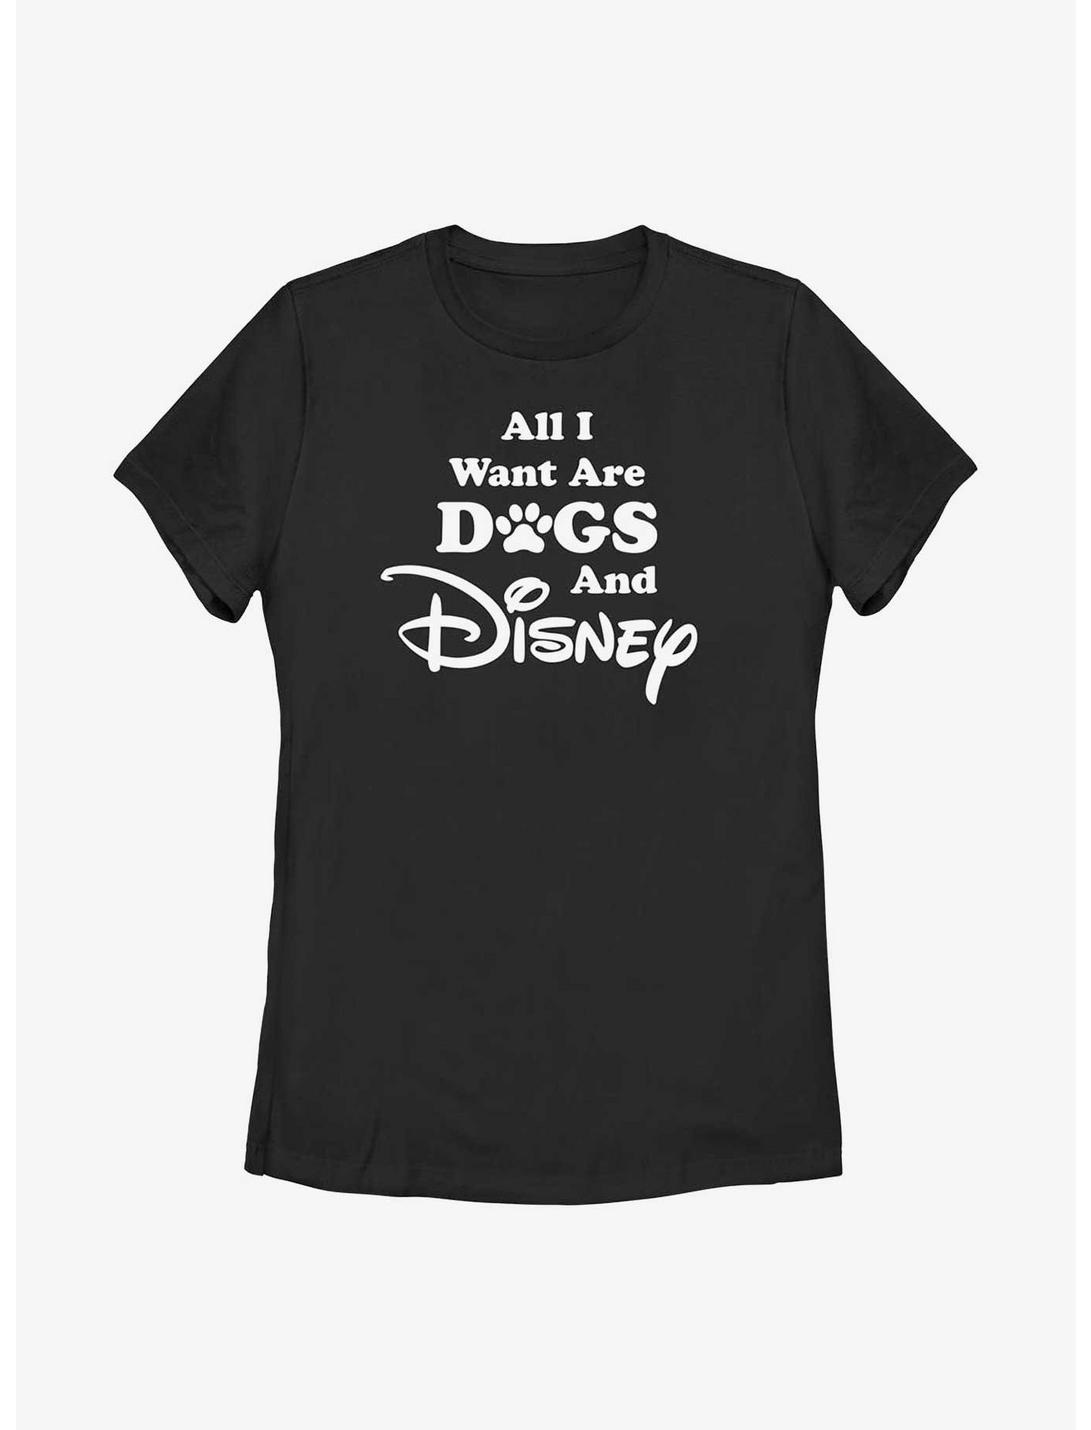 Disney Channel All I Want Are Dogs and Disney Womens T-Shirt, BLACK, hi-res